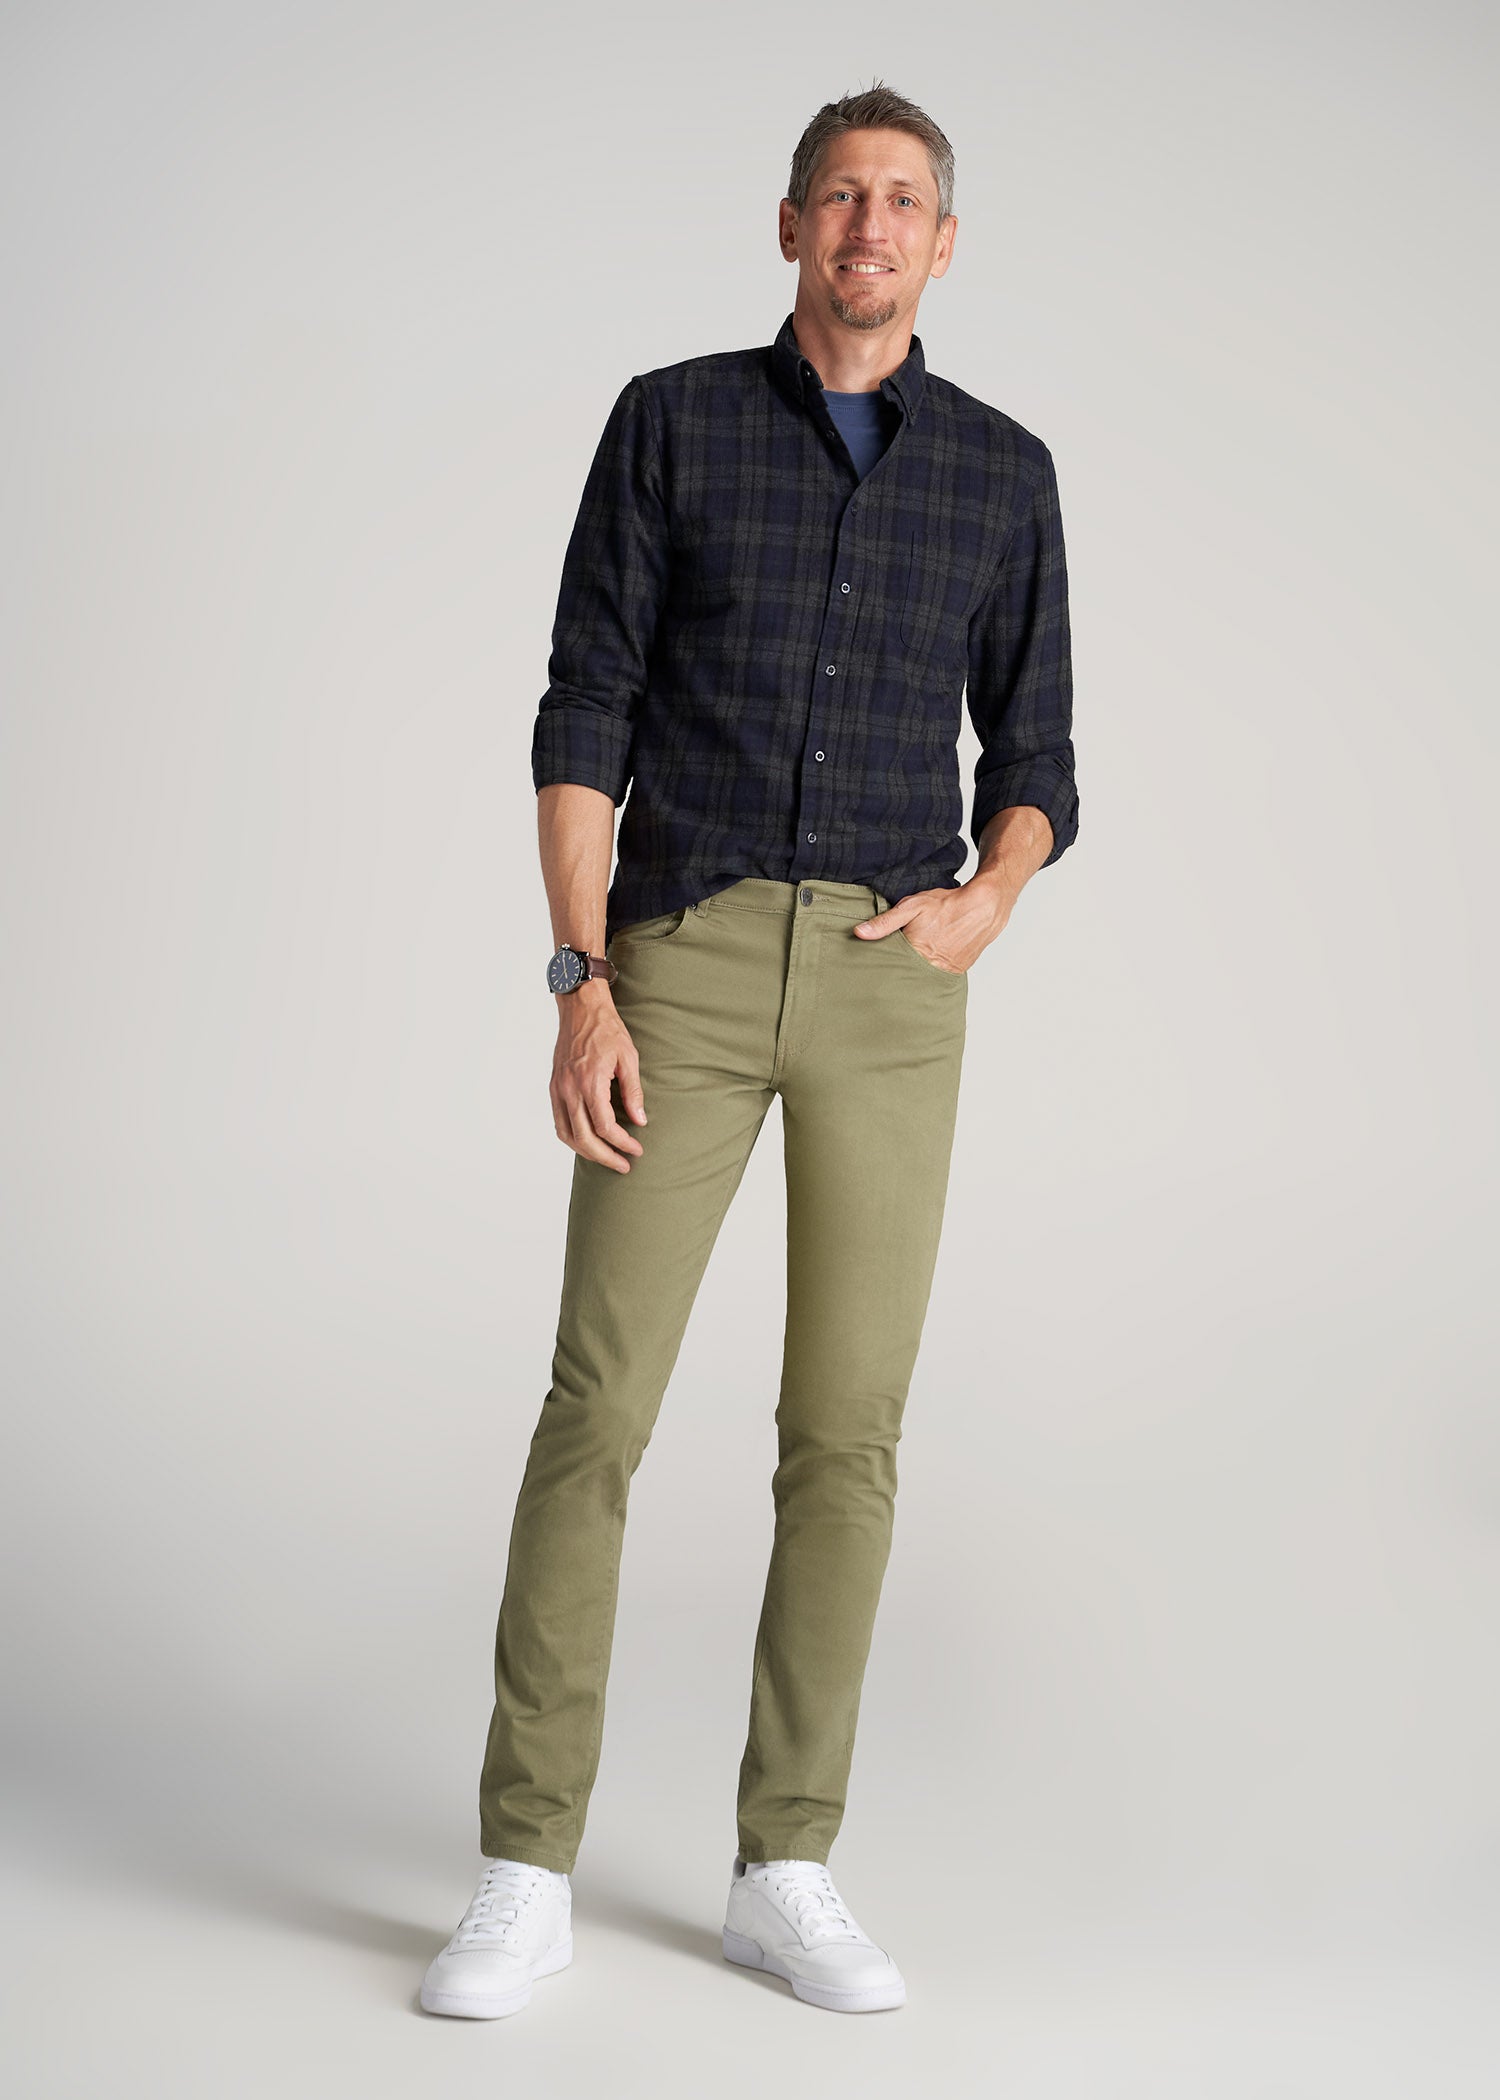 Buy Men's K-Styled Green Pant Online | SNITCH